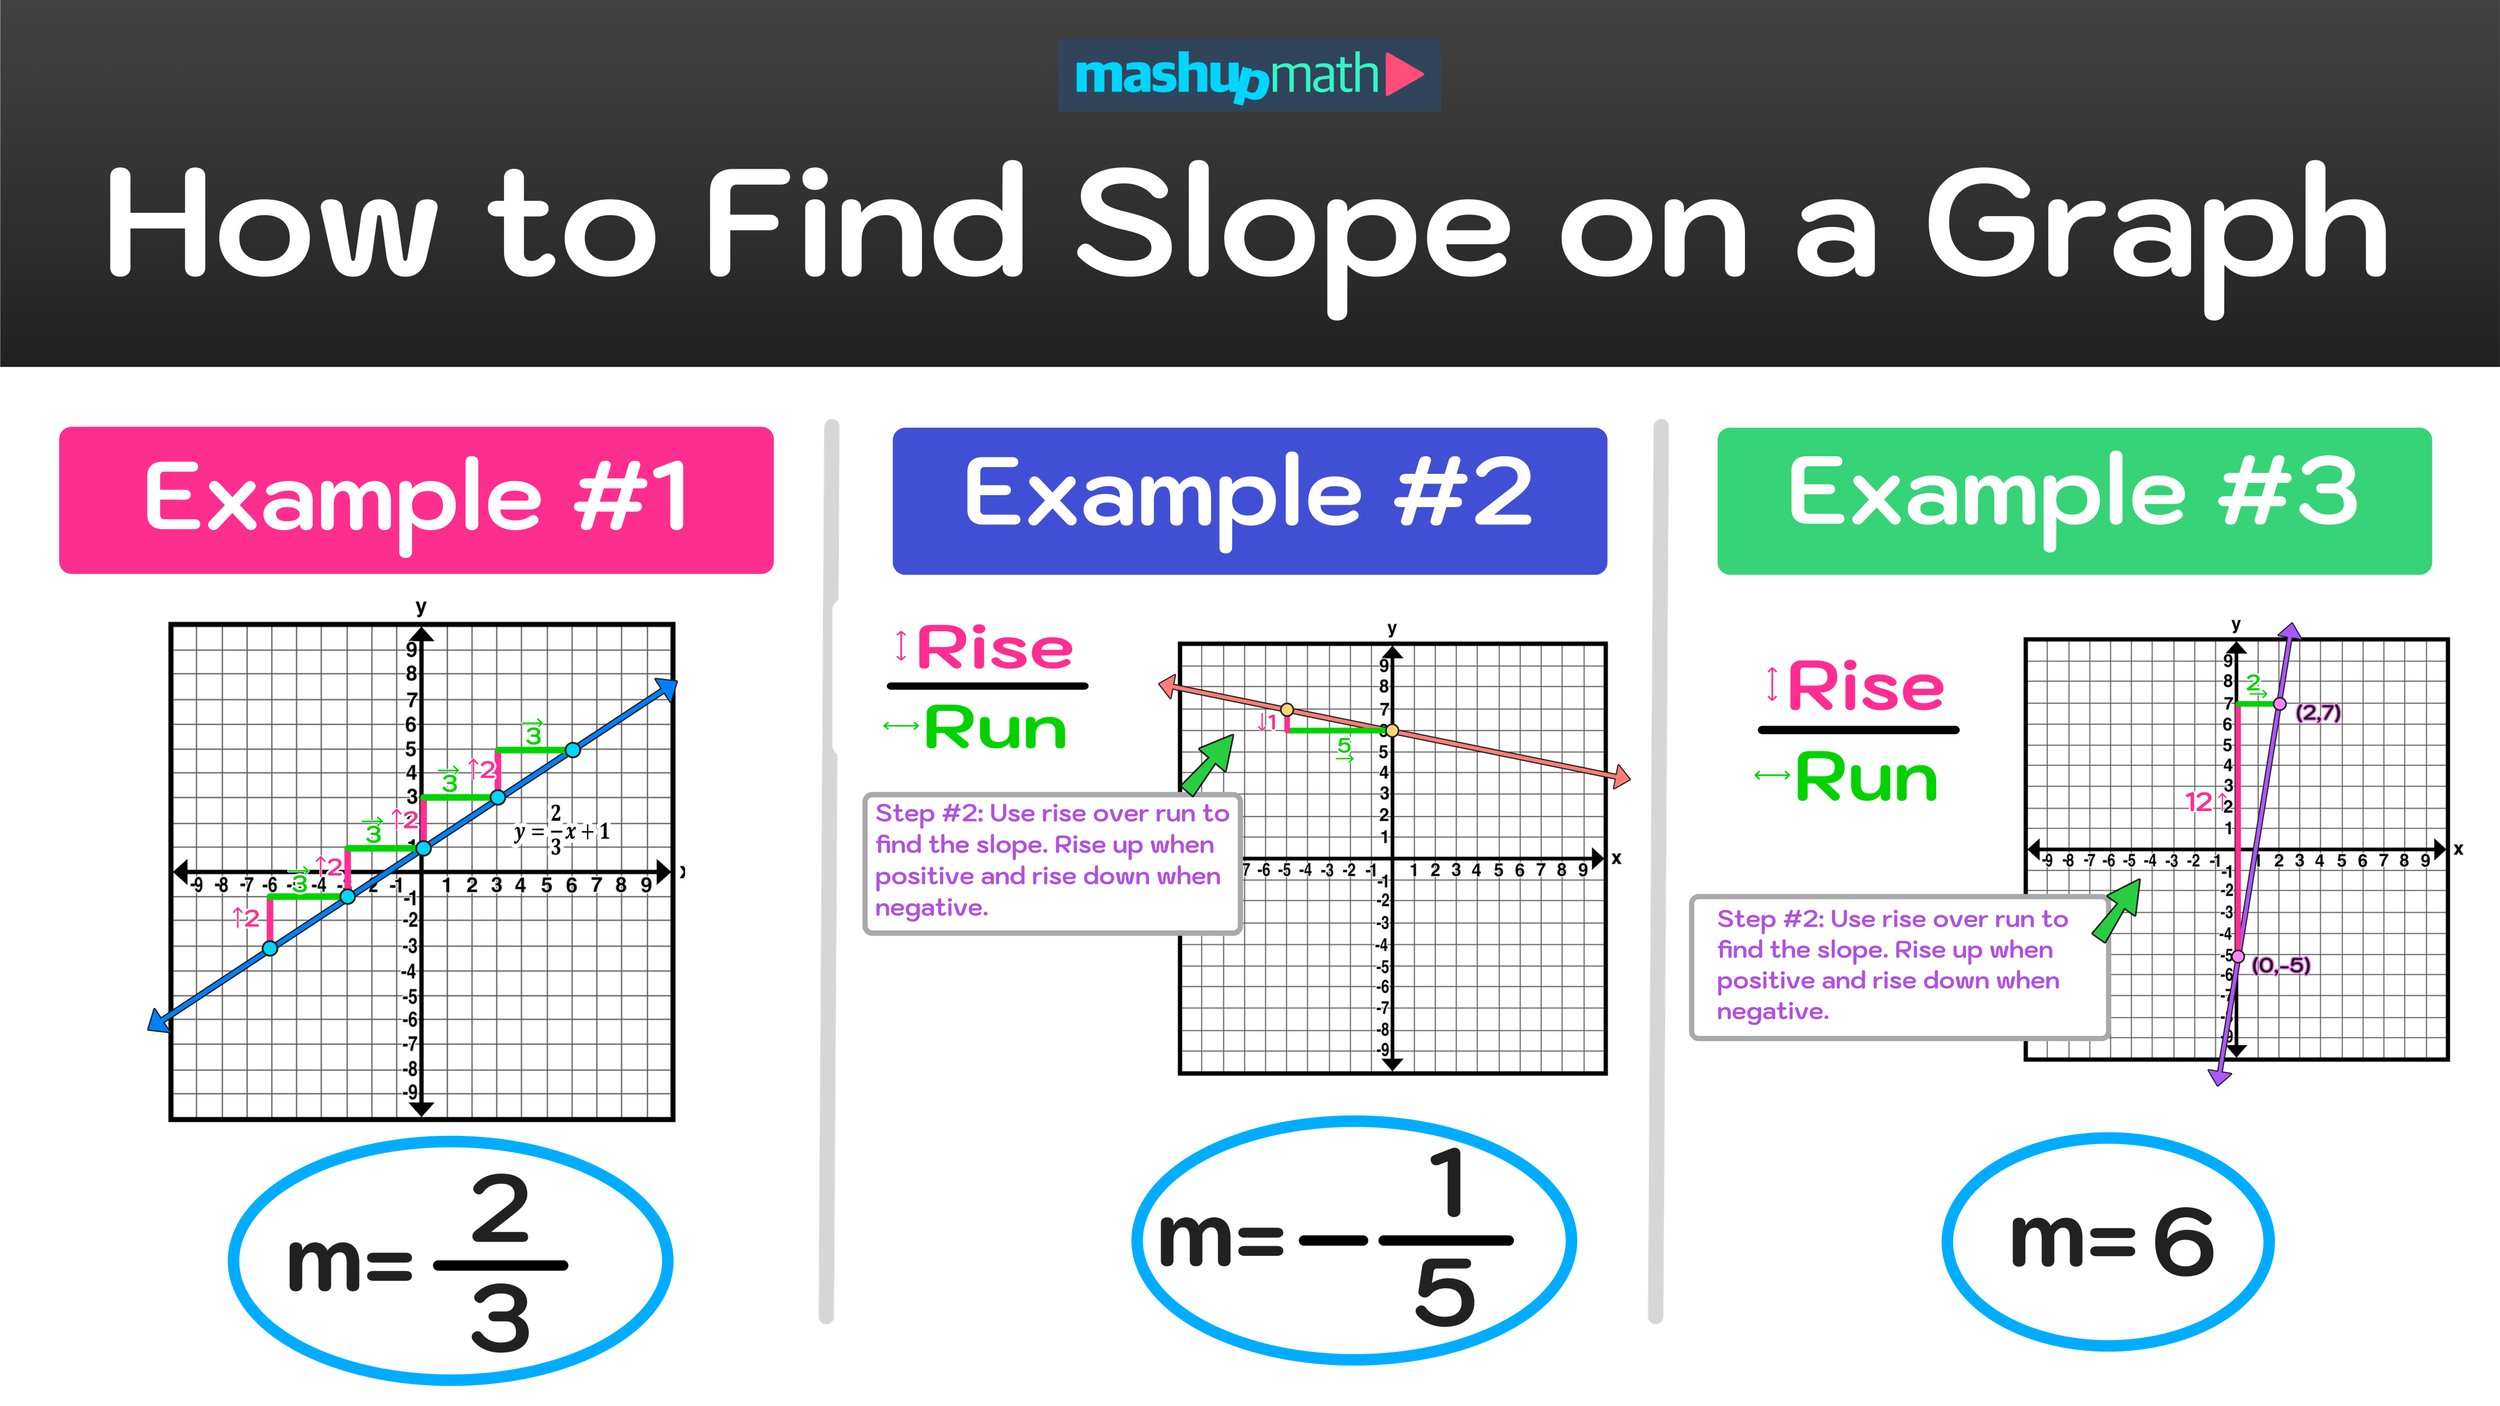 How to Find Slope on a Graph in 3 Easy Steps